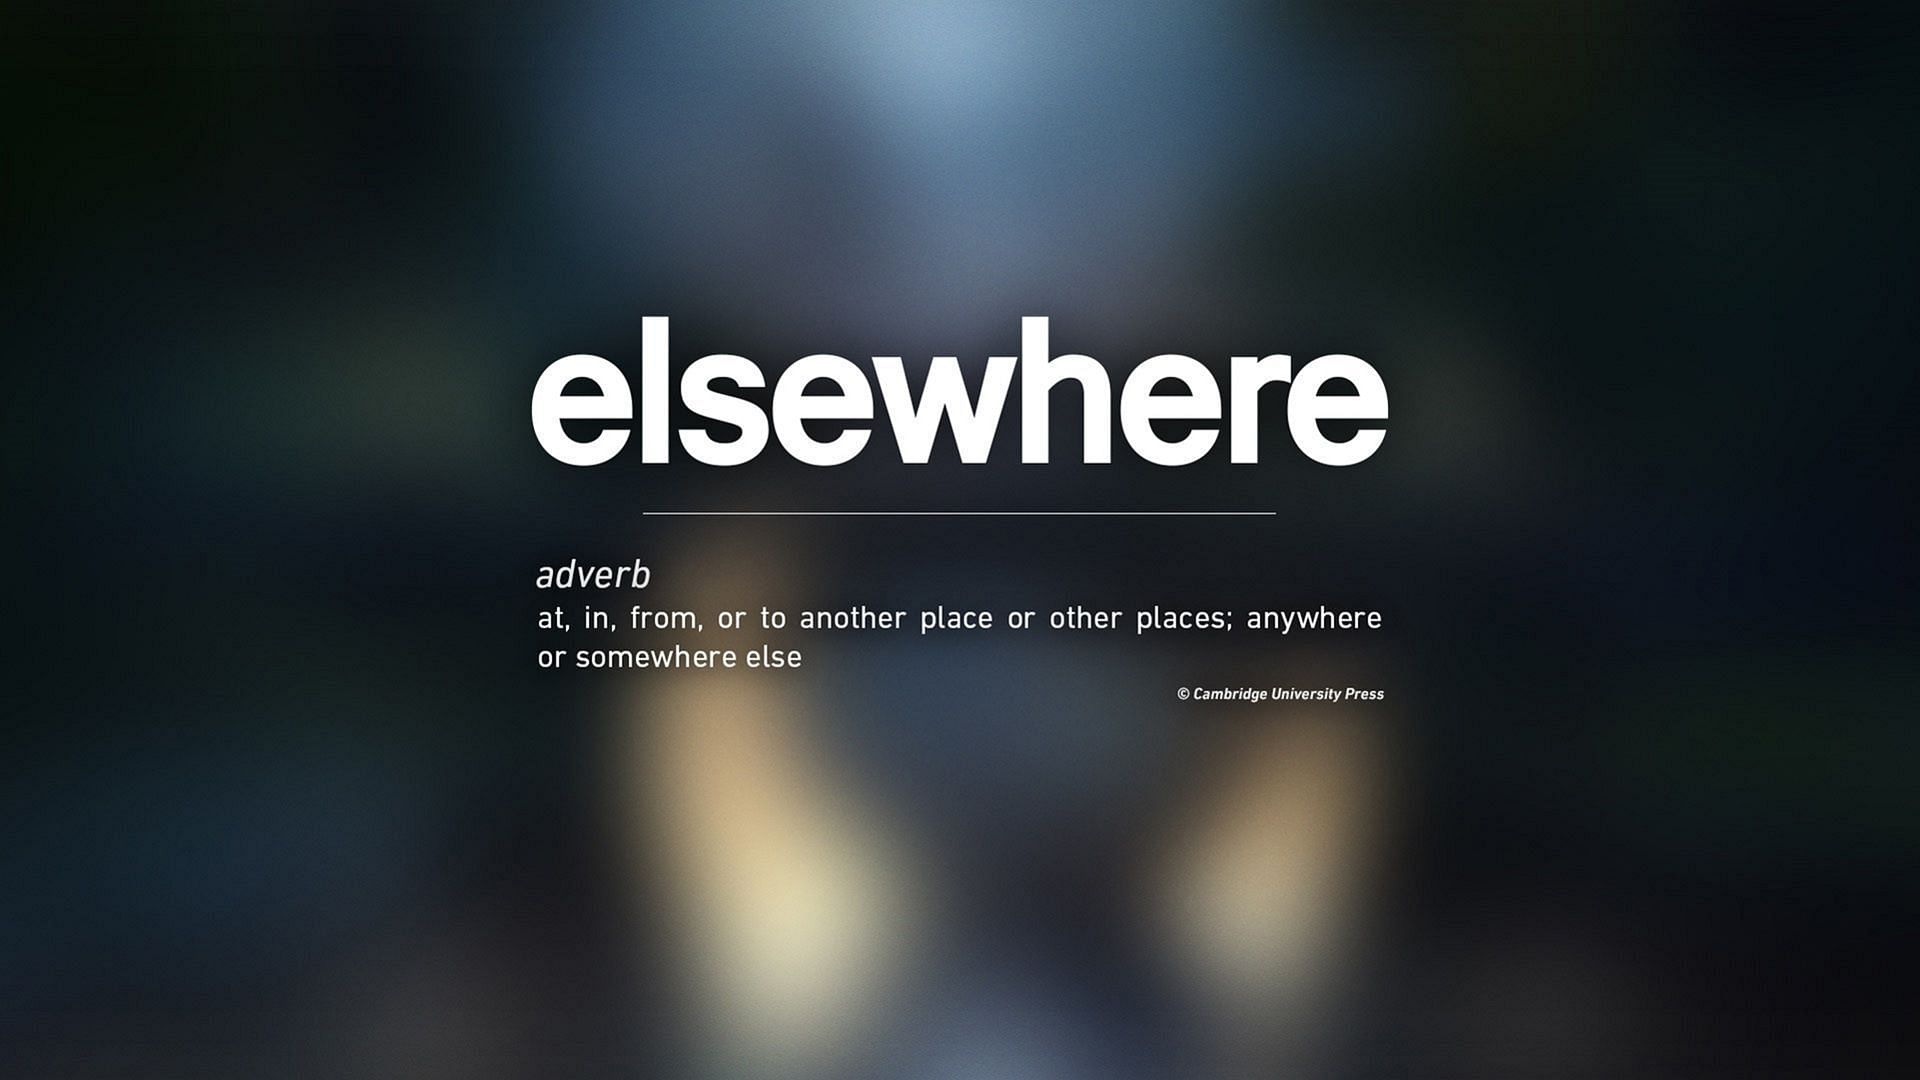 Microsoft-owned publisher Activision has created a new AAA studio called Elsewhere Entertainment with a talented group from popular franchises like The Last of Us